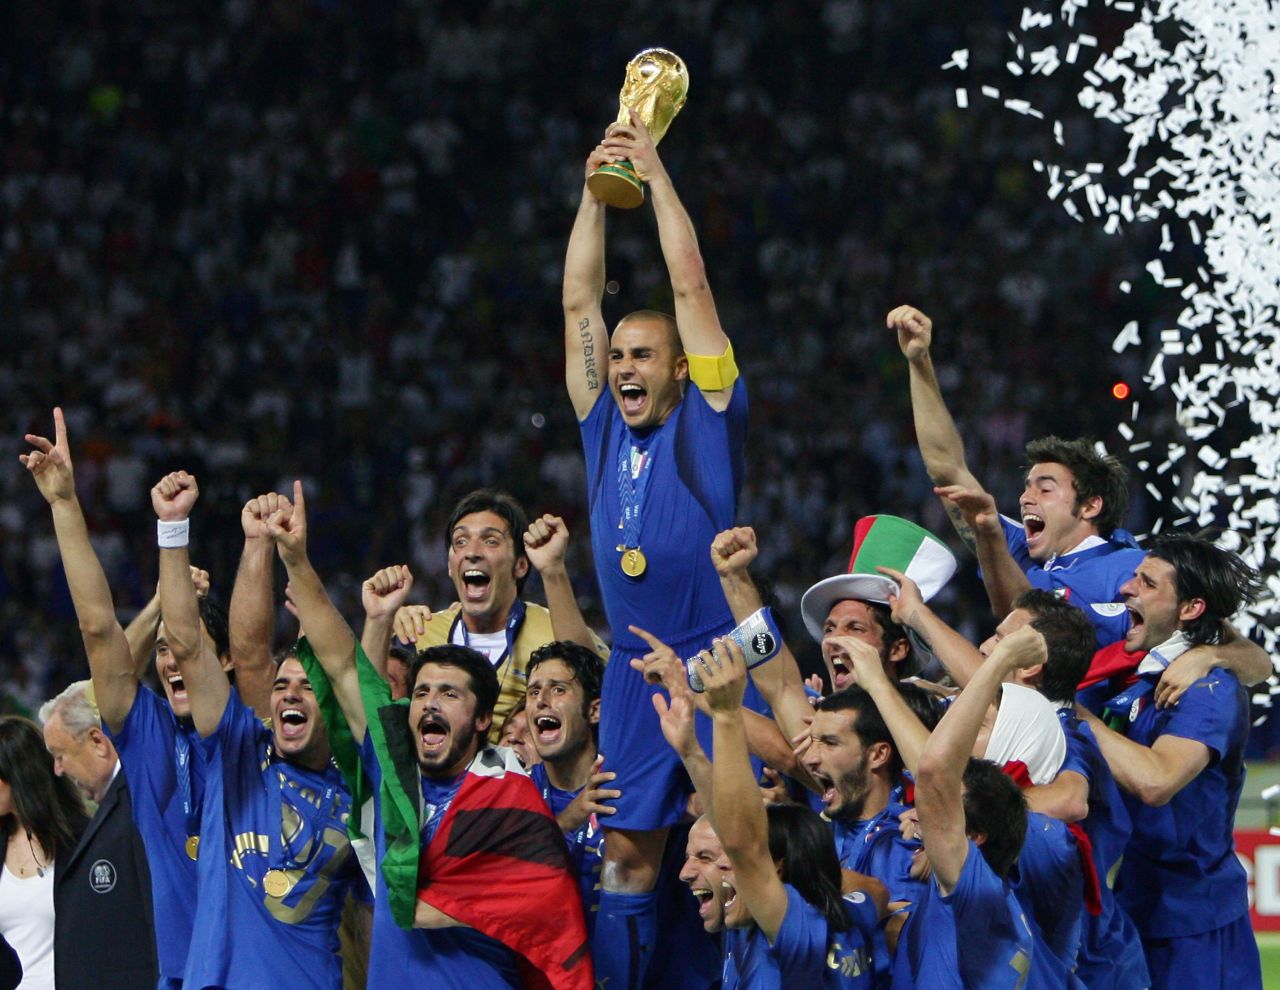 It was Cattelan's native Italy which won the 2006 World Cup, defeating France on penalties in the final.